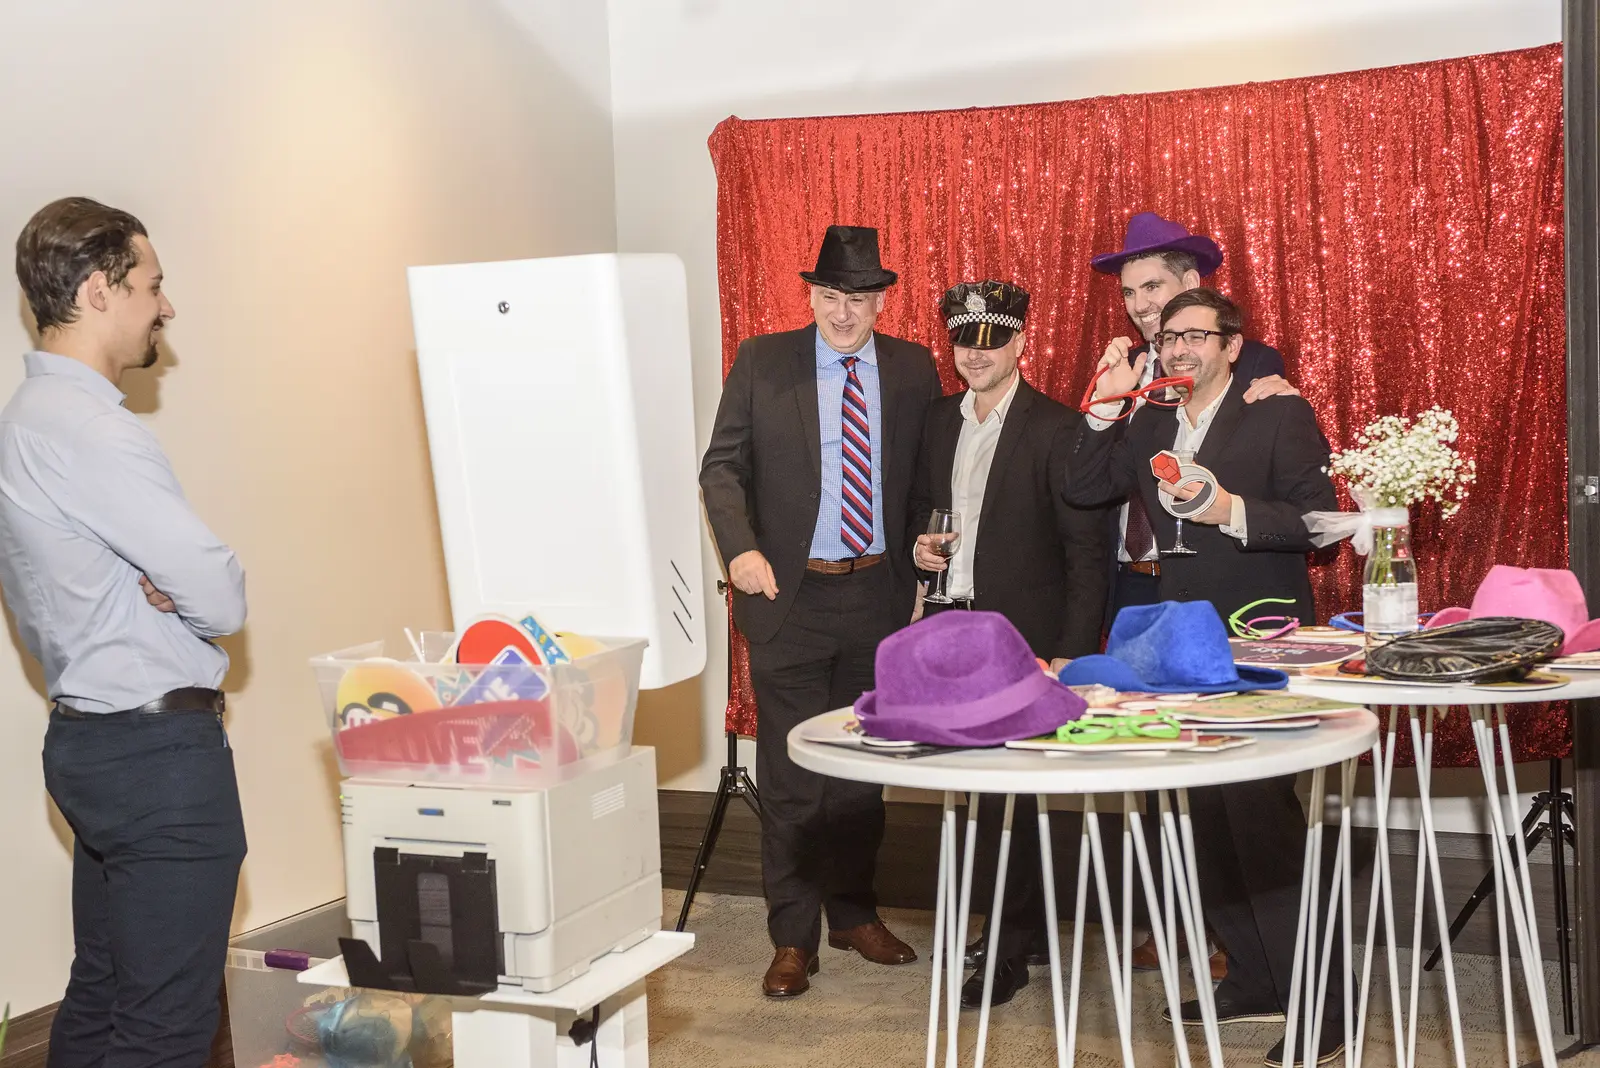 Corporate event attendees enjoying a photobooth with a vibrant red sequin backdrop, trying on various fun hats and glasses from a prop table, with a photobooth kiosk and printer in the scene, provided by Rent a PhotoBooth photobooth rentals.